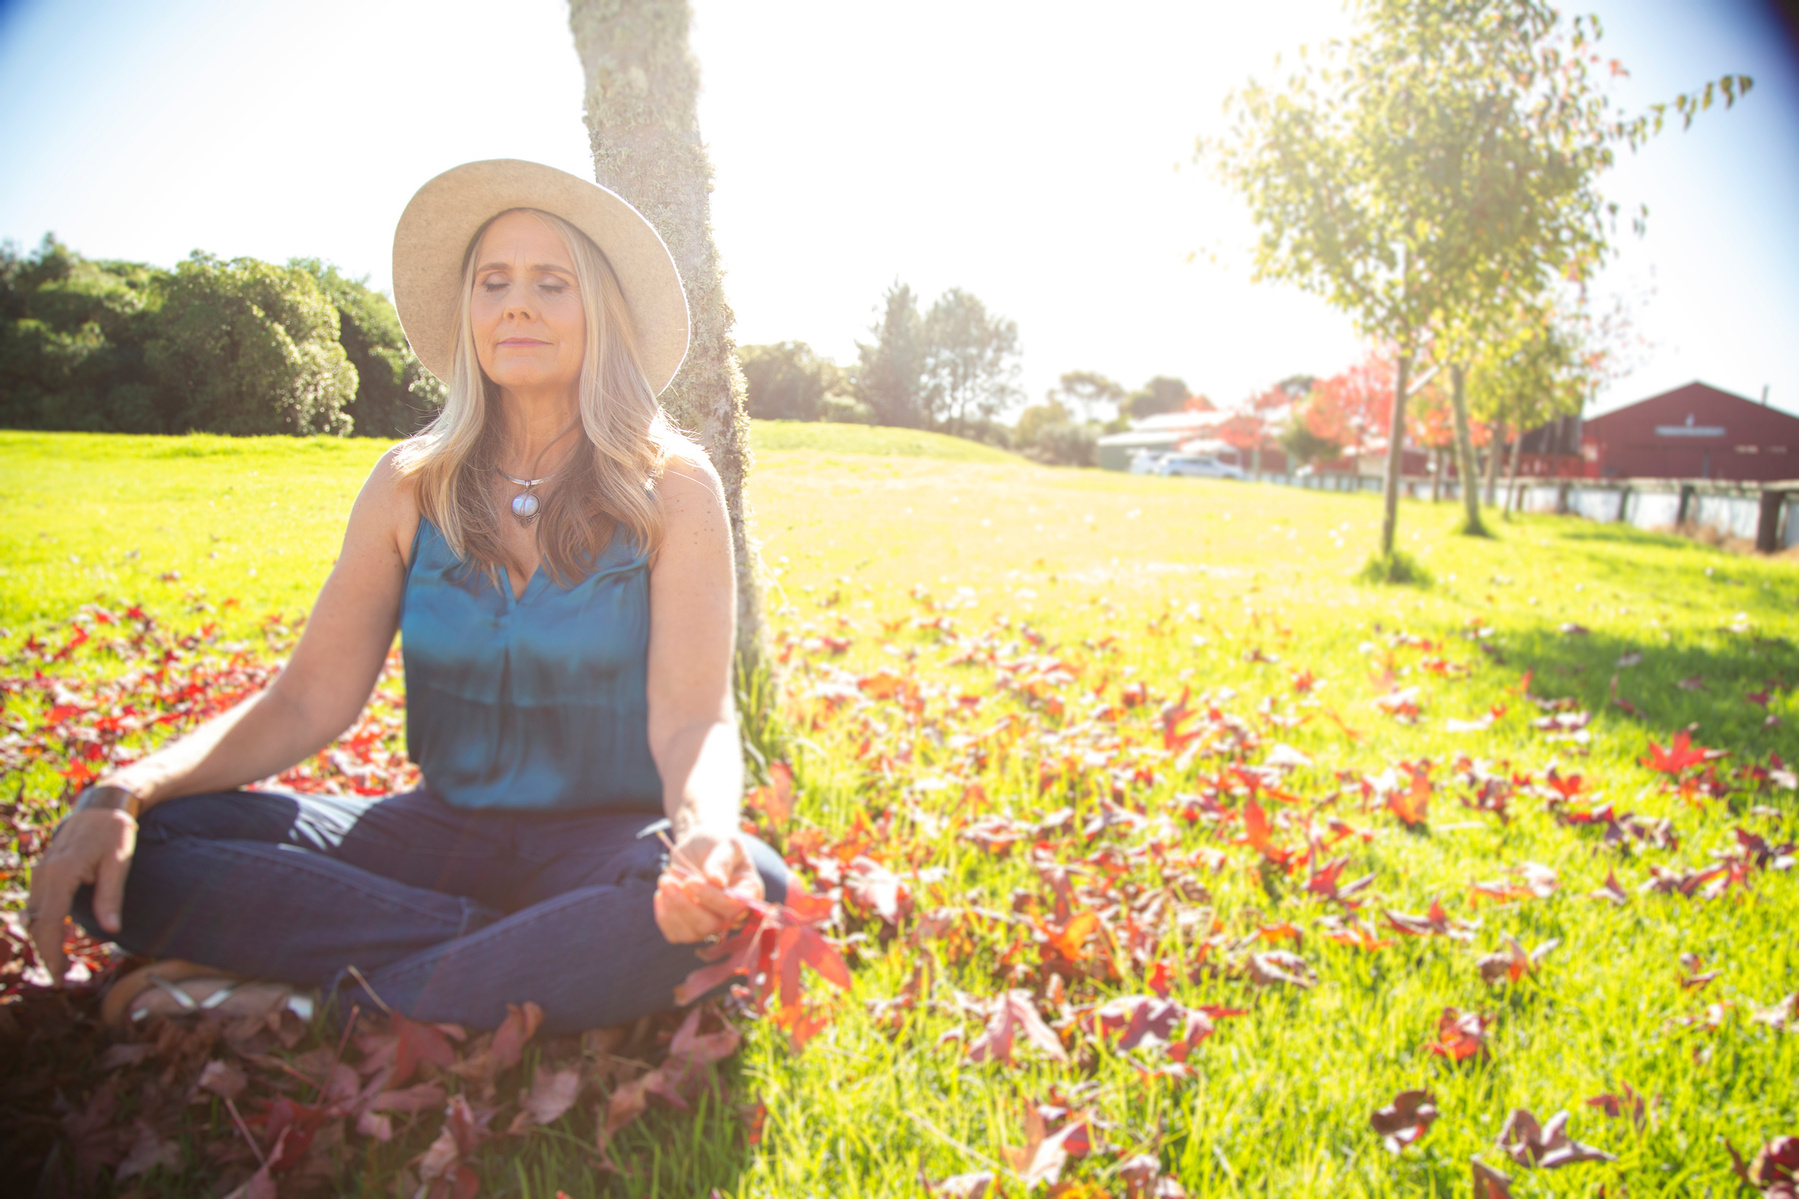 A blonde woman sits outside meditating, the bring sunshine filling the frame